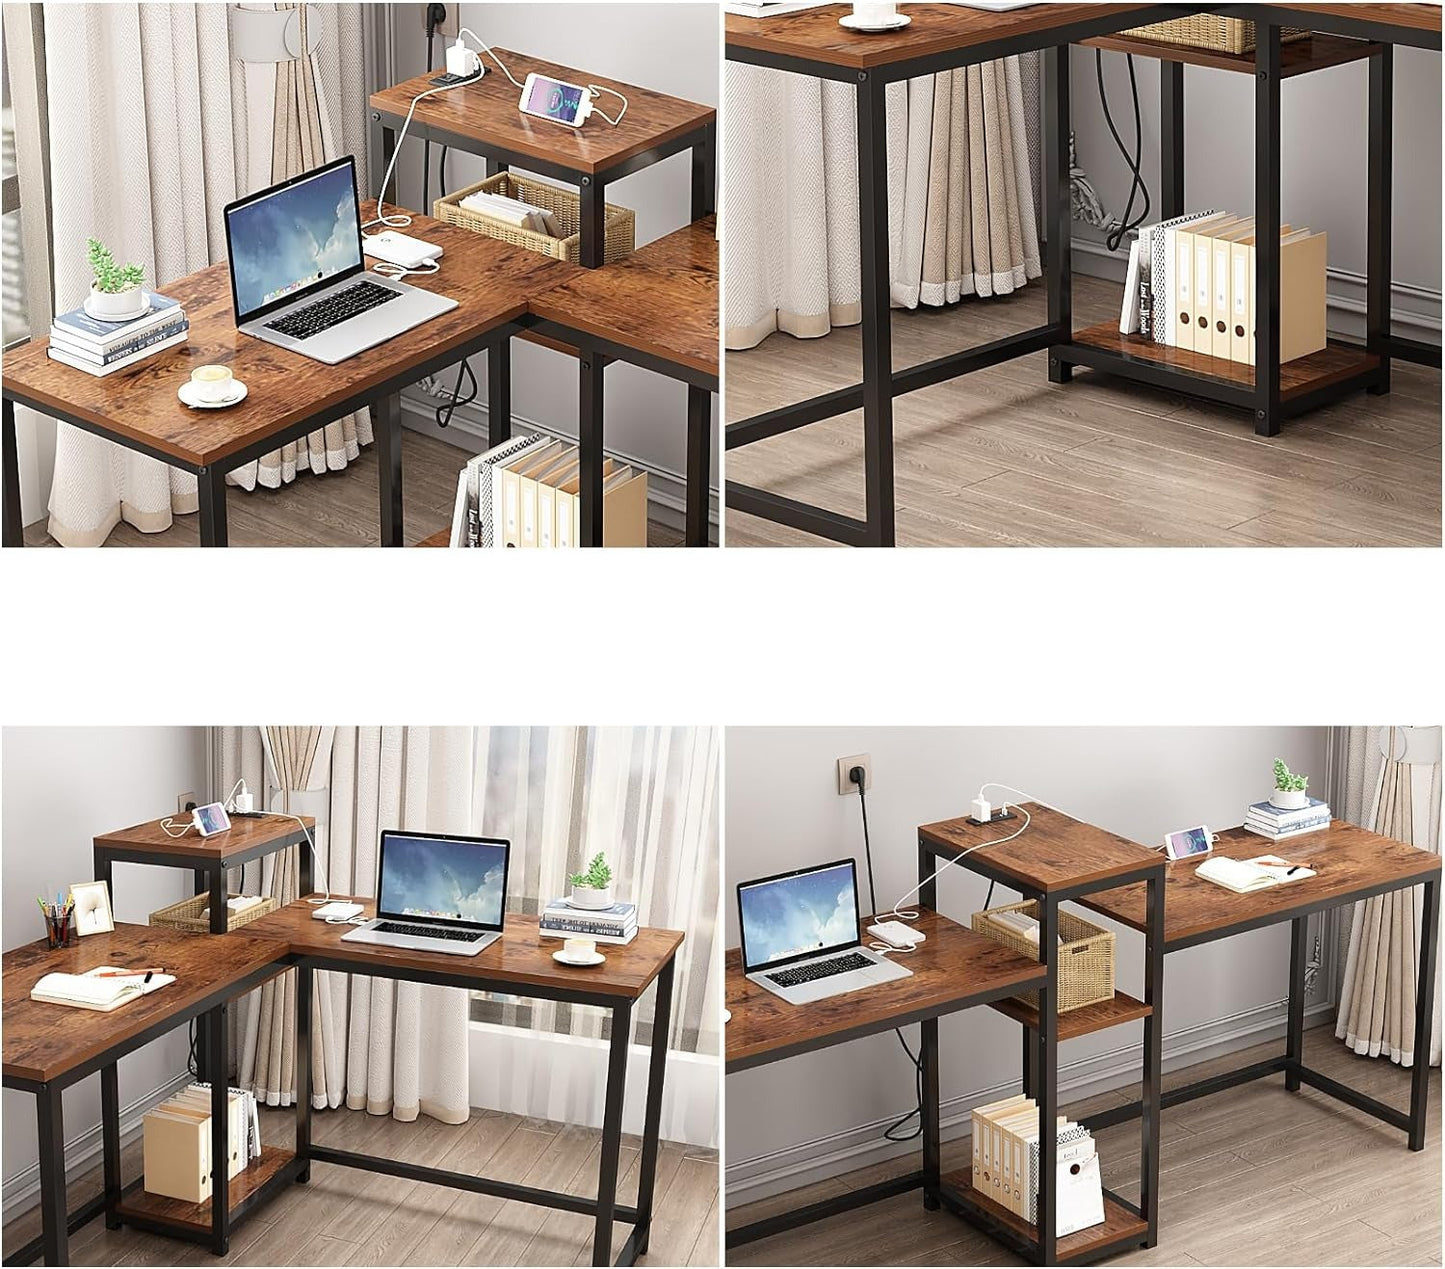 83 Inches Two Person Desk with Power Outlet rustic style detail